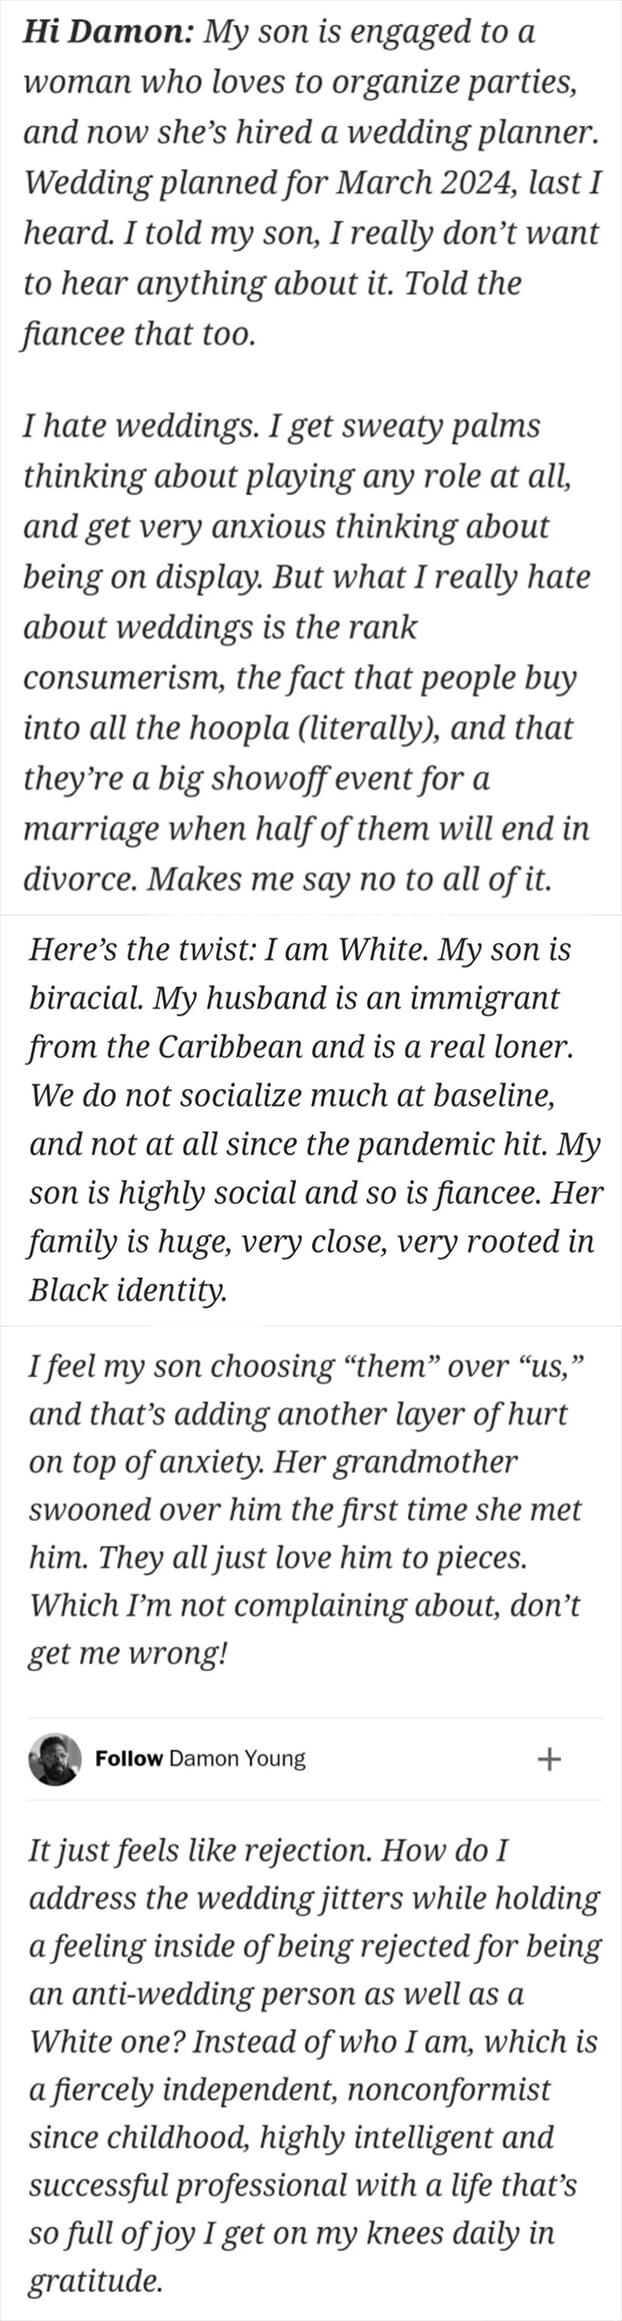 The mother of the groom says they hate weddings and feel that her son having a wedding with a Black woman is him choosing &quot;them&quot; over &quot;us,&quot; with them and us in quotes